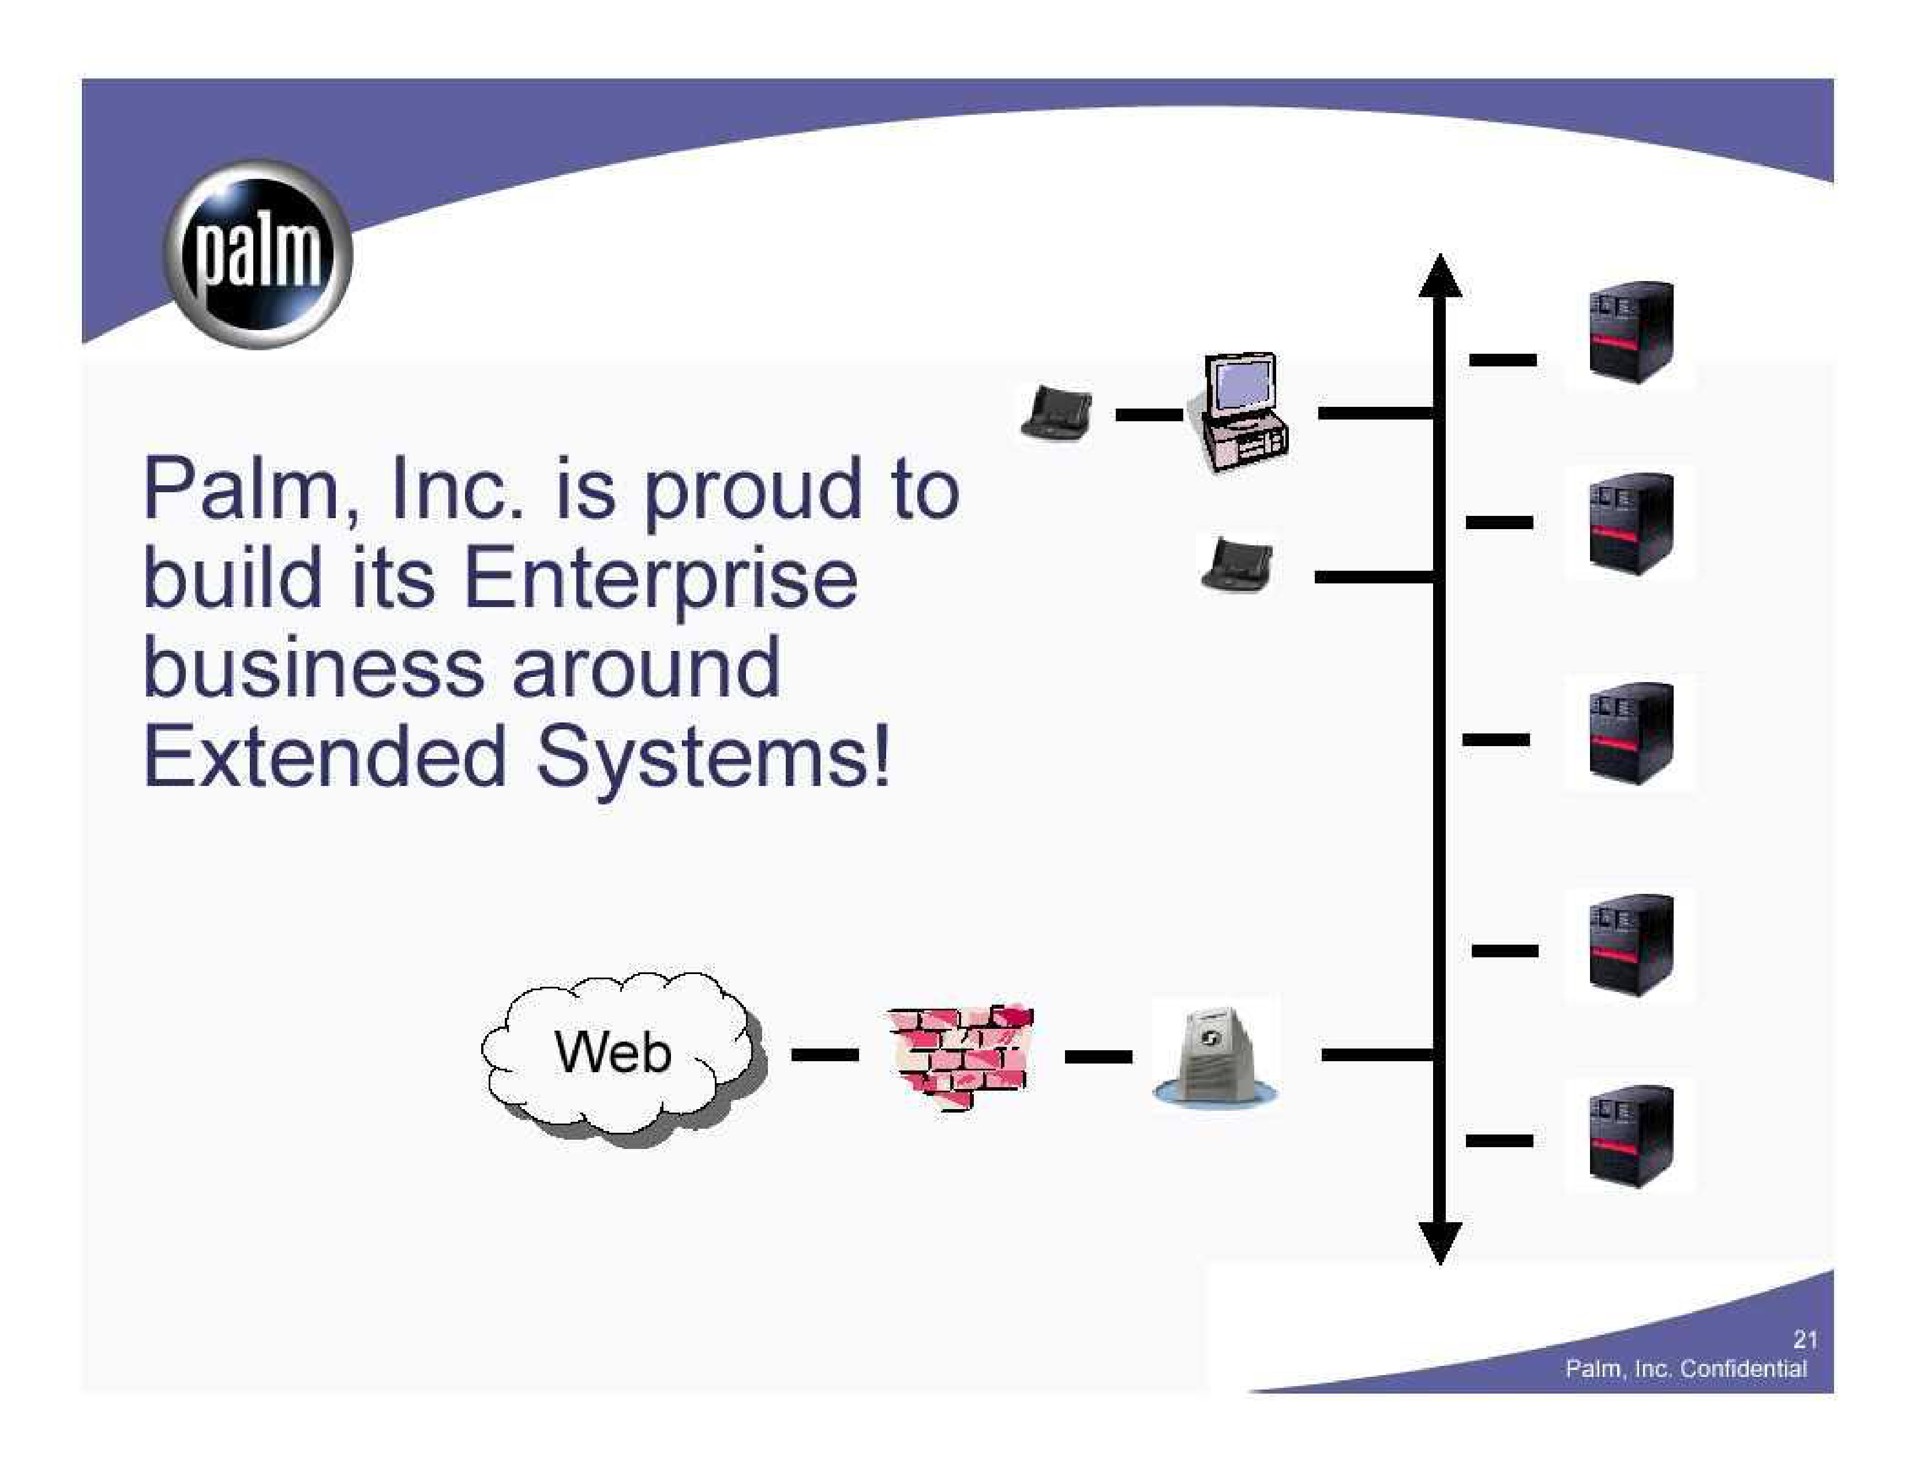 palm is to build its enterprise business around extended systems | Palm Inc.